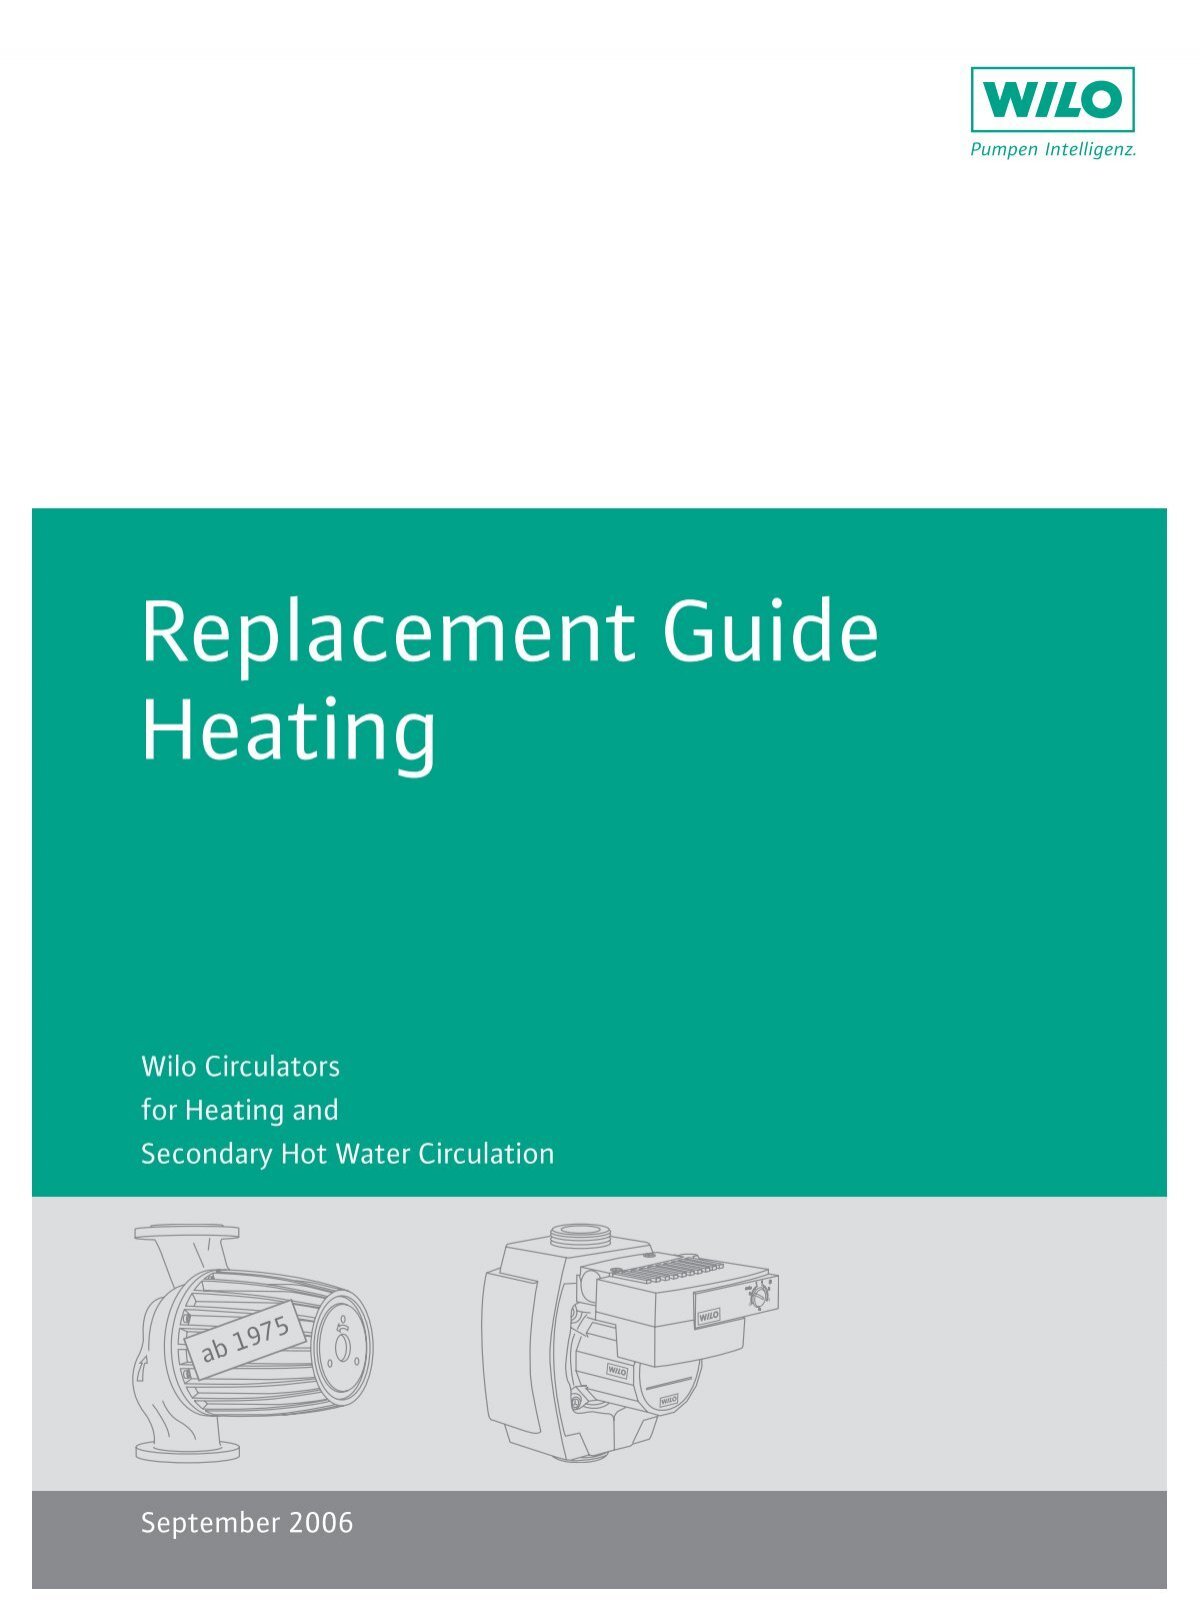 Guide Heating - Wilo